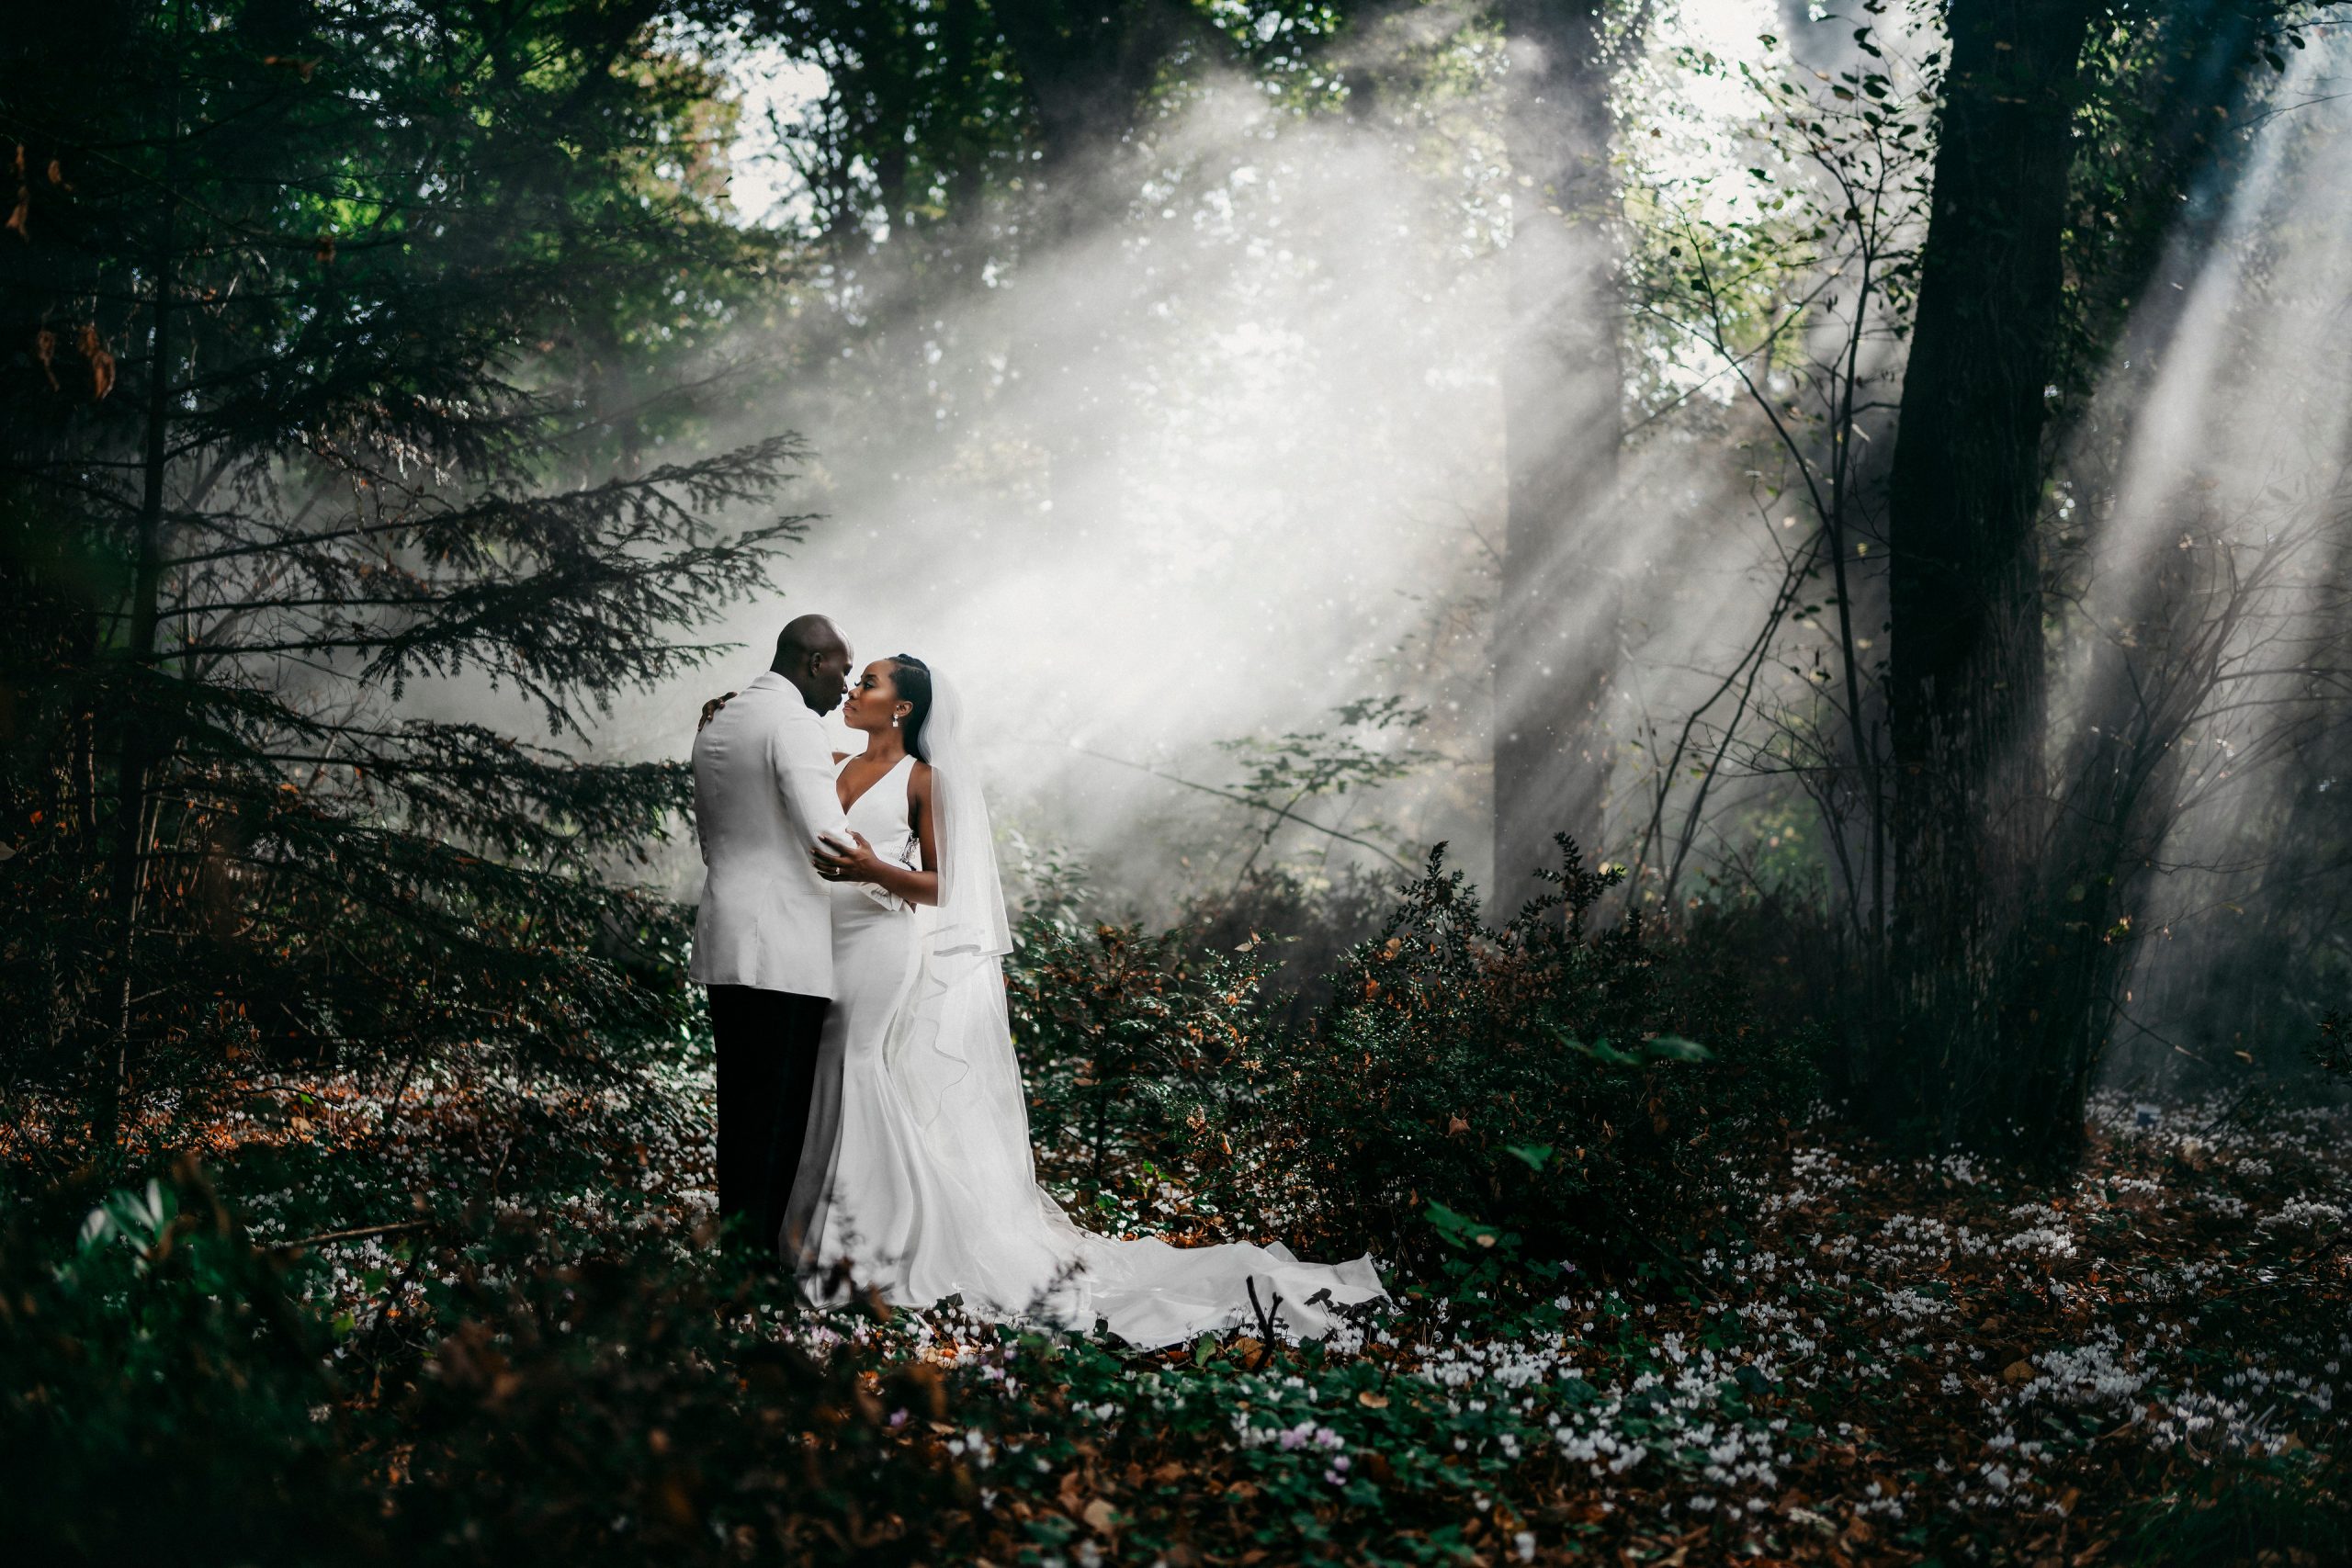 Bride and groom in a beautiful greenery with light shining through the trees